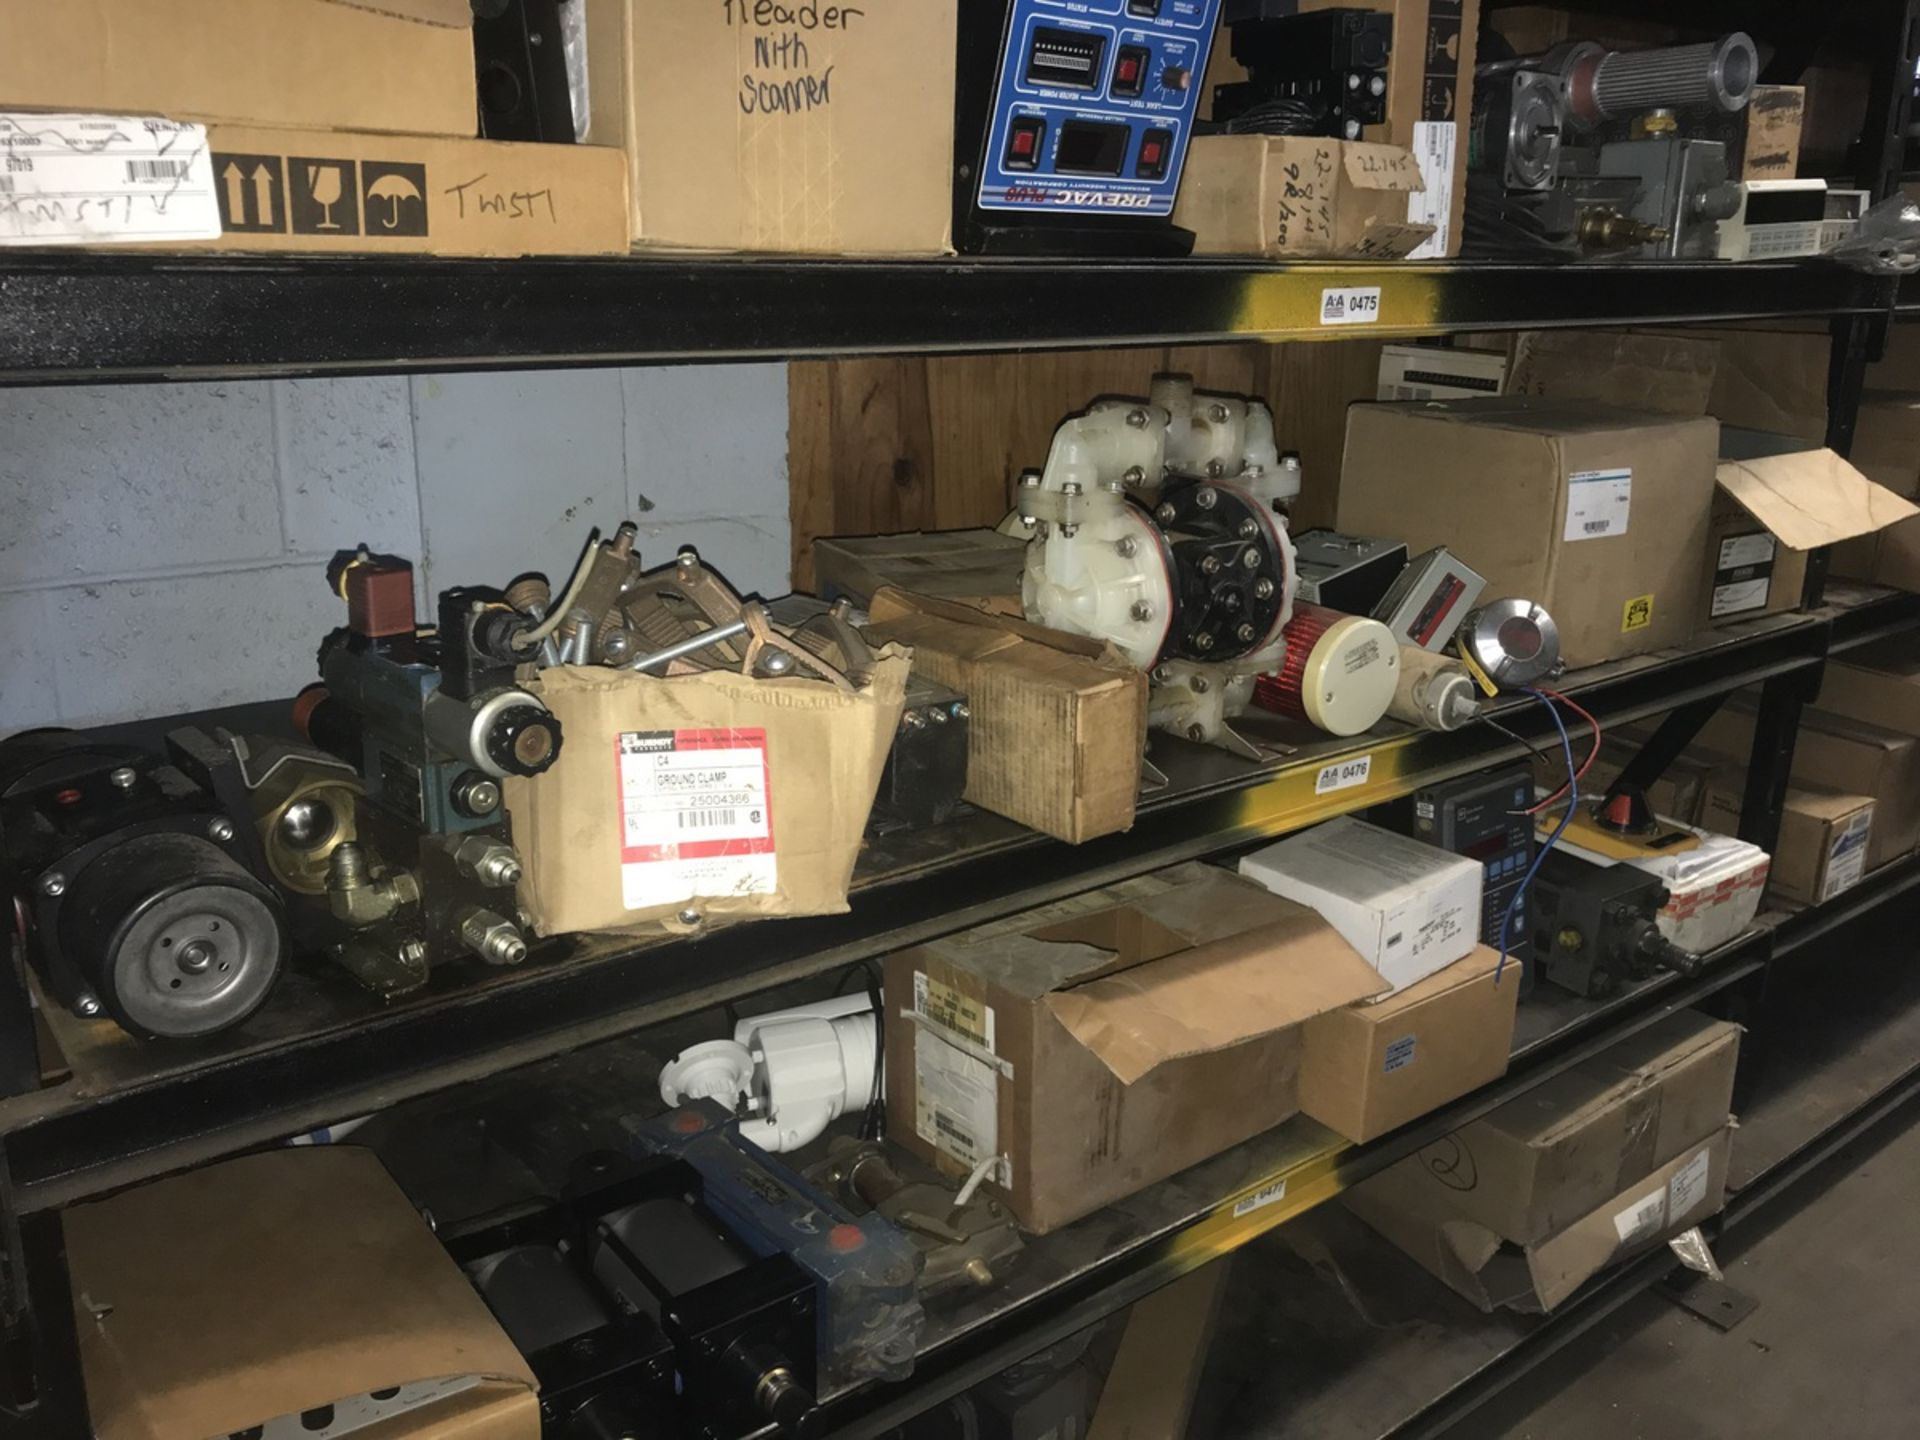 Contents of Shelf including Pumps, Clamps, Modules, Relays and Bushings